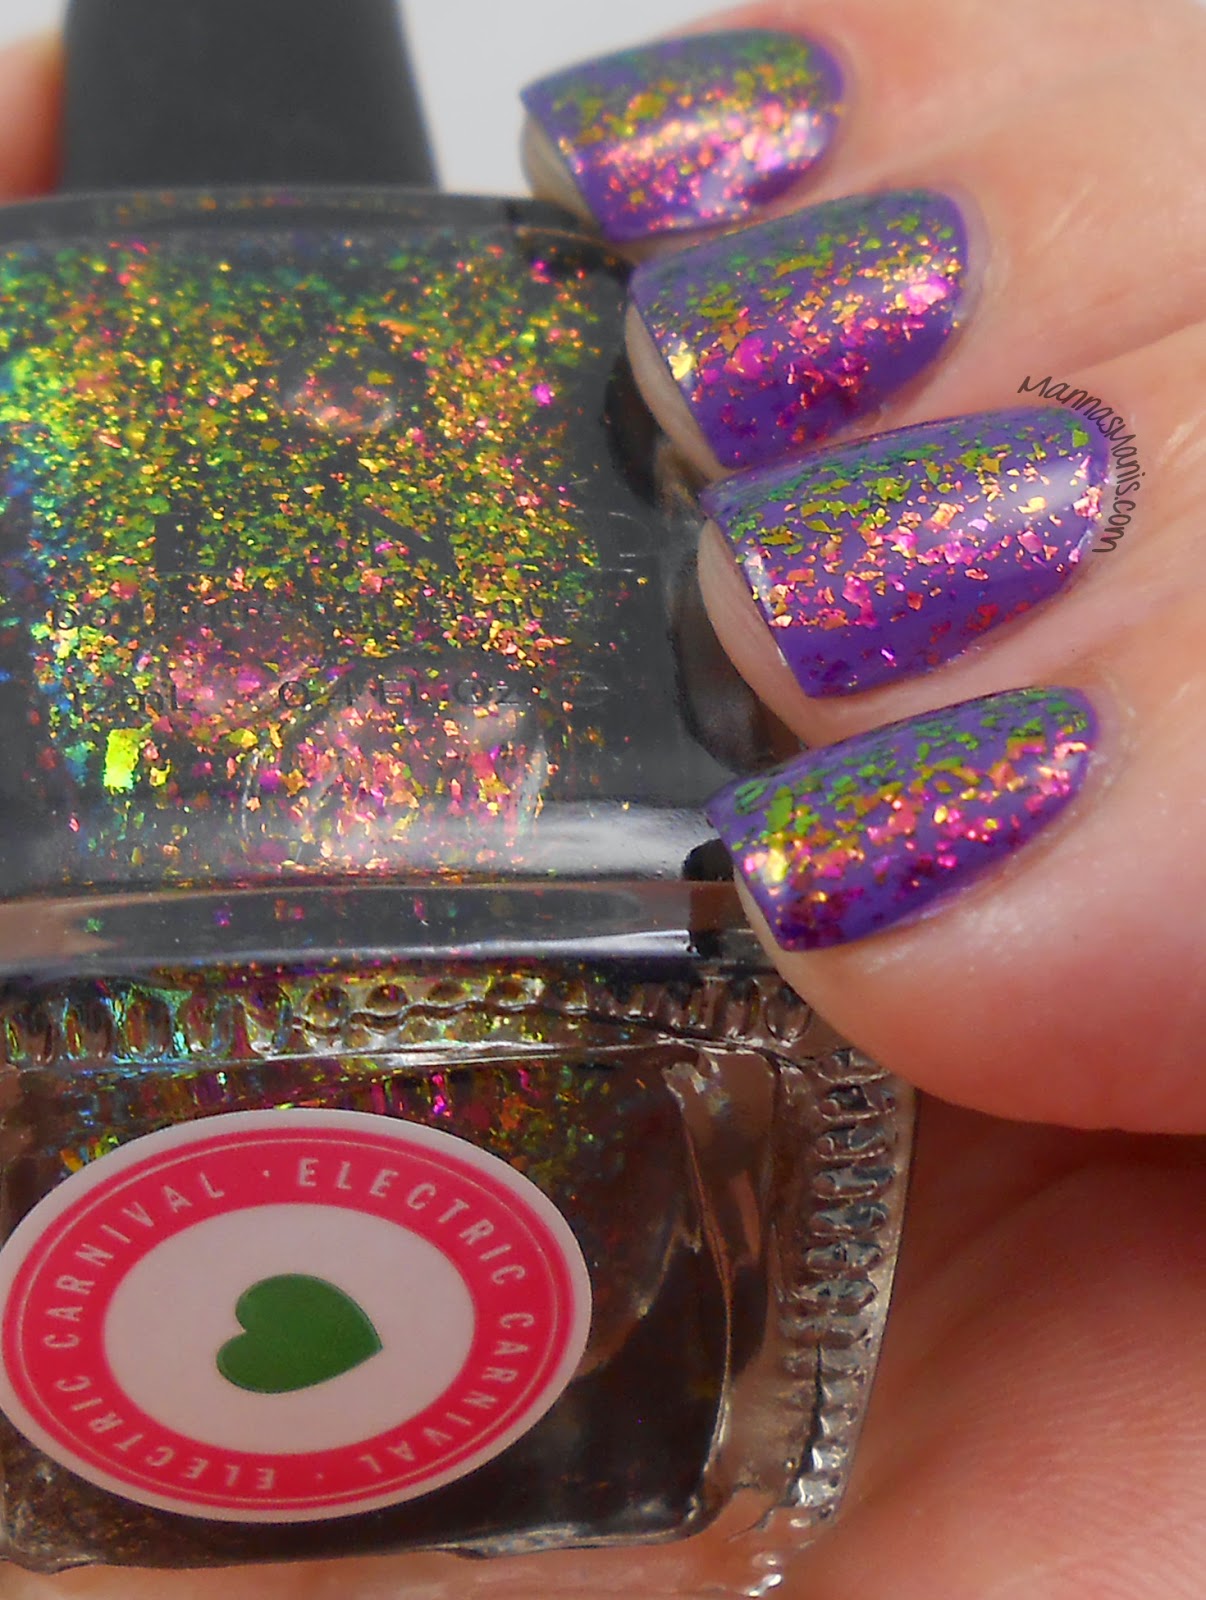 ILNP electric carnival, a multicolored flakie nail polish